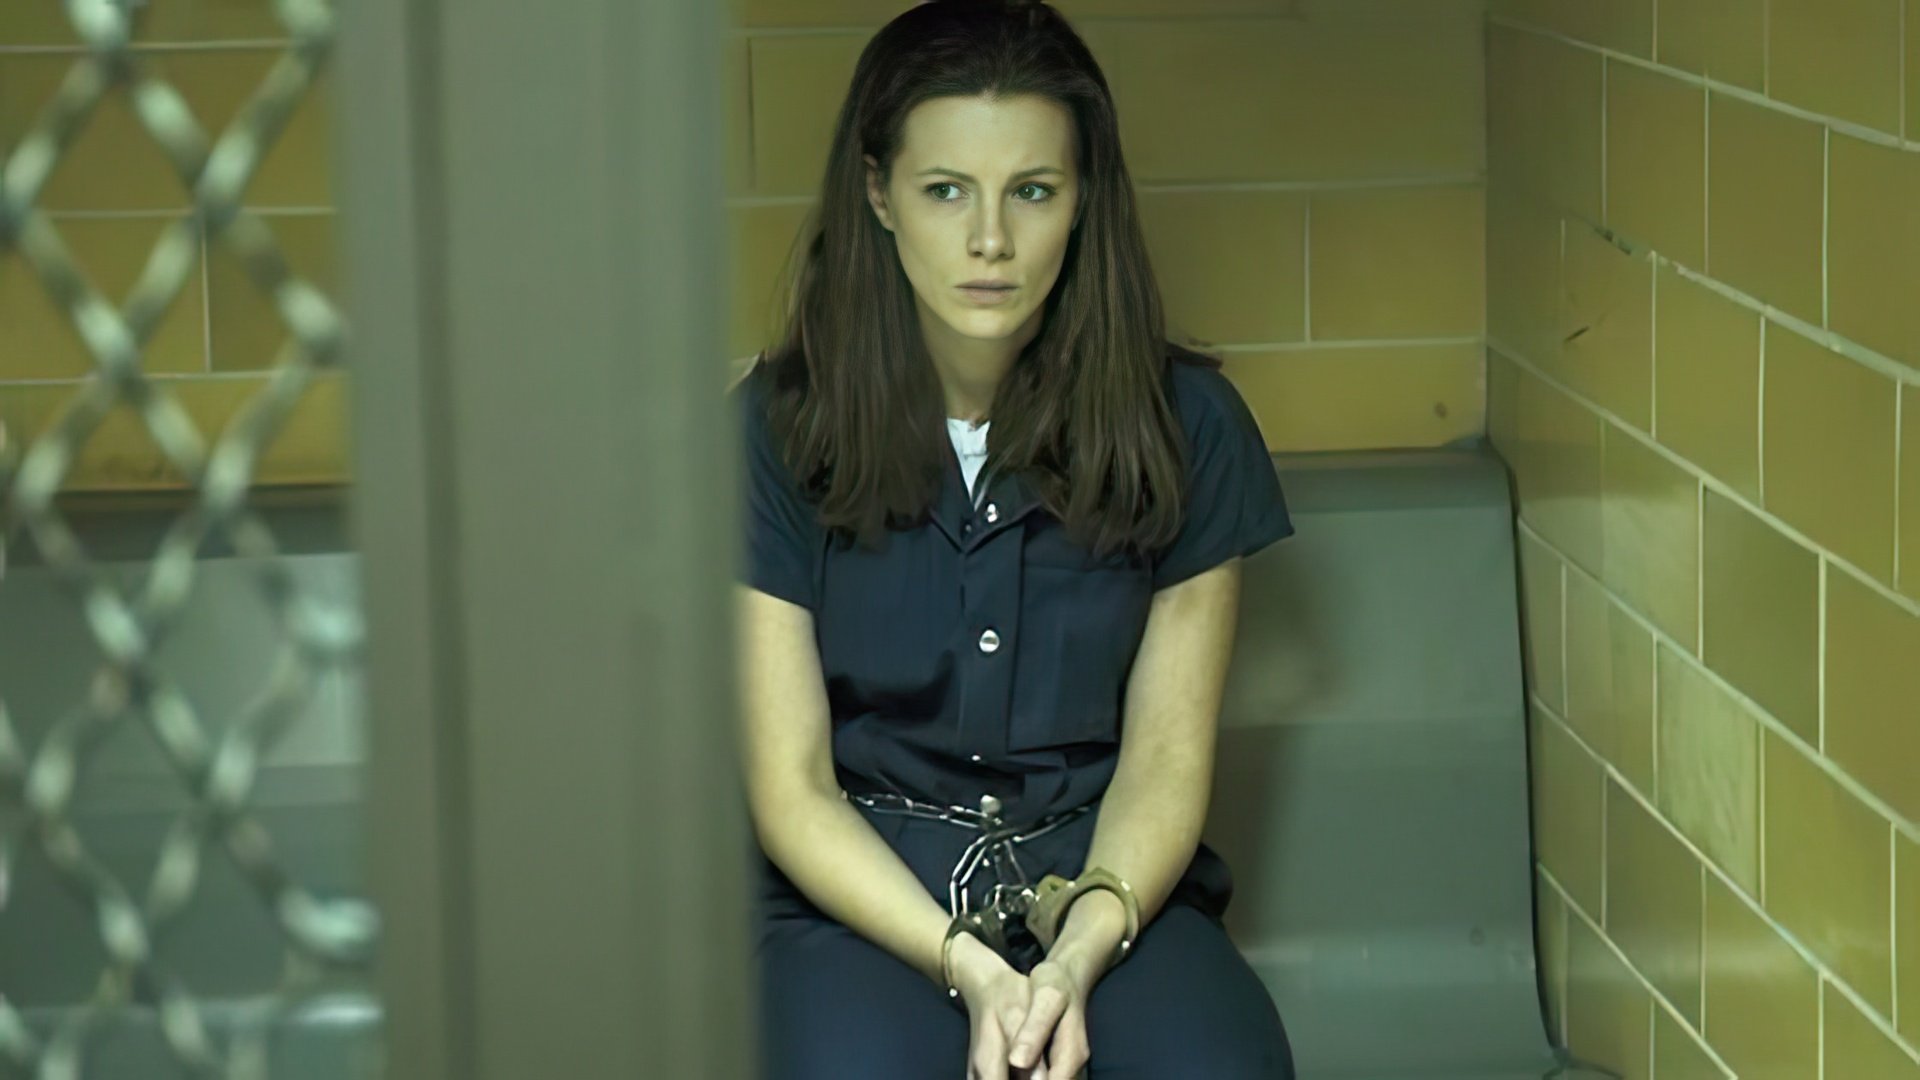 Kate Beckinsale in the film Nothing but the Truth